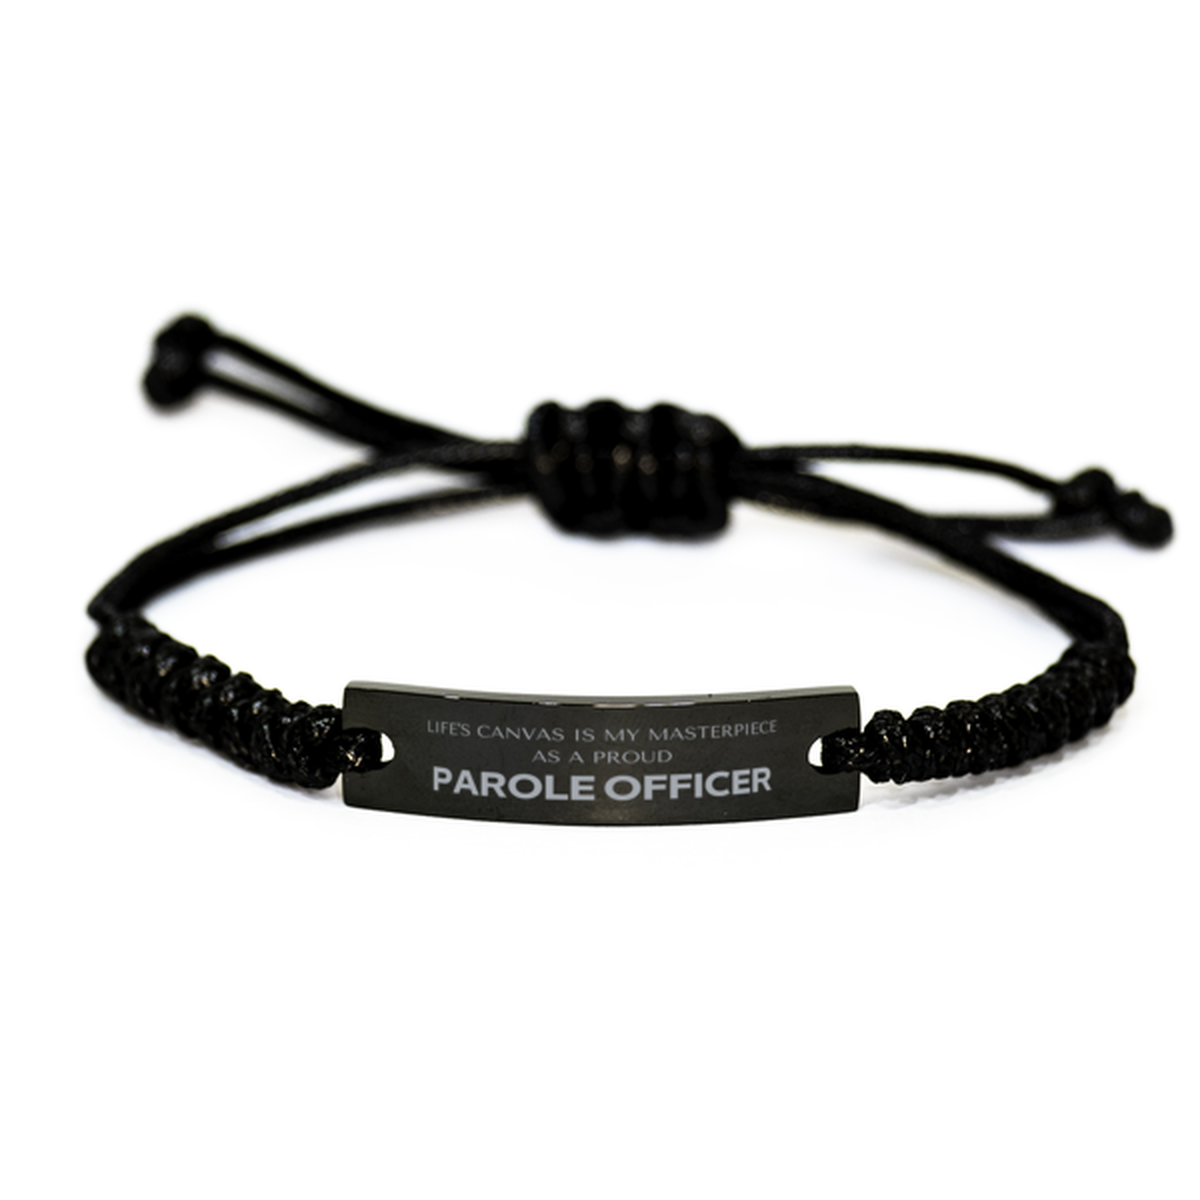 Proud Parole Officer Gifts, Life's canvas is my masterpiece, Epic Birthday Christmas Unique Black Rope Bracelet For Parole Officer, Coworkers, Men, Women, Friends